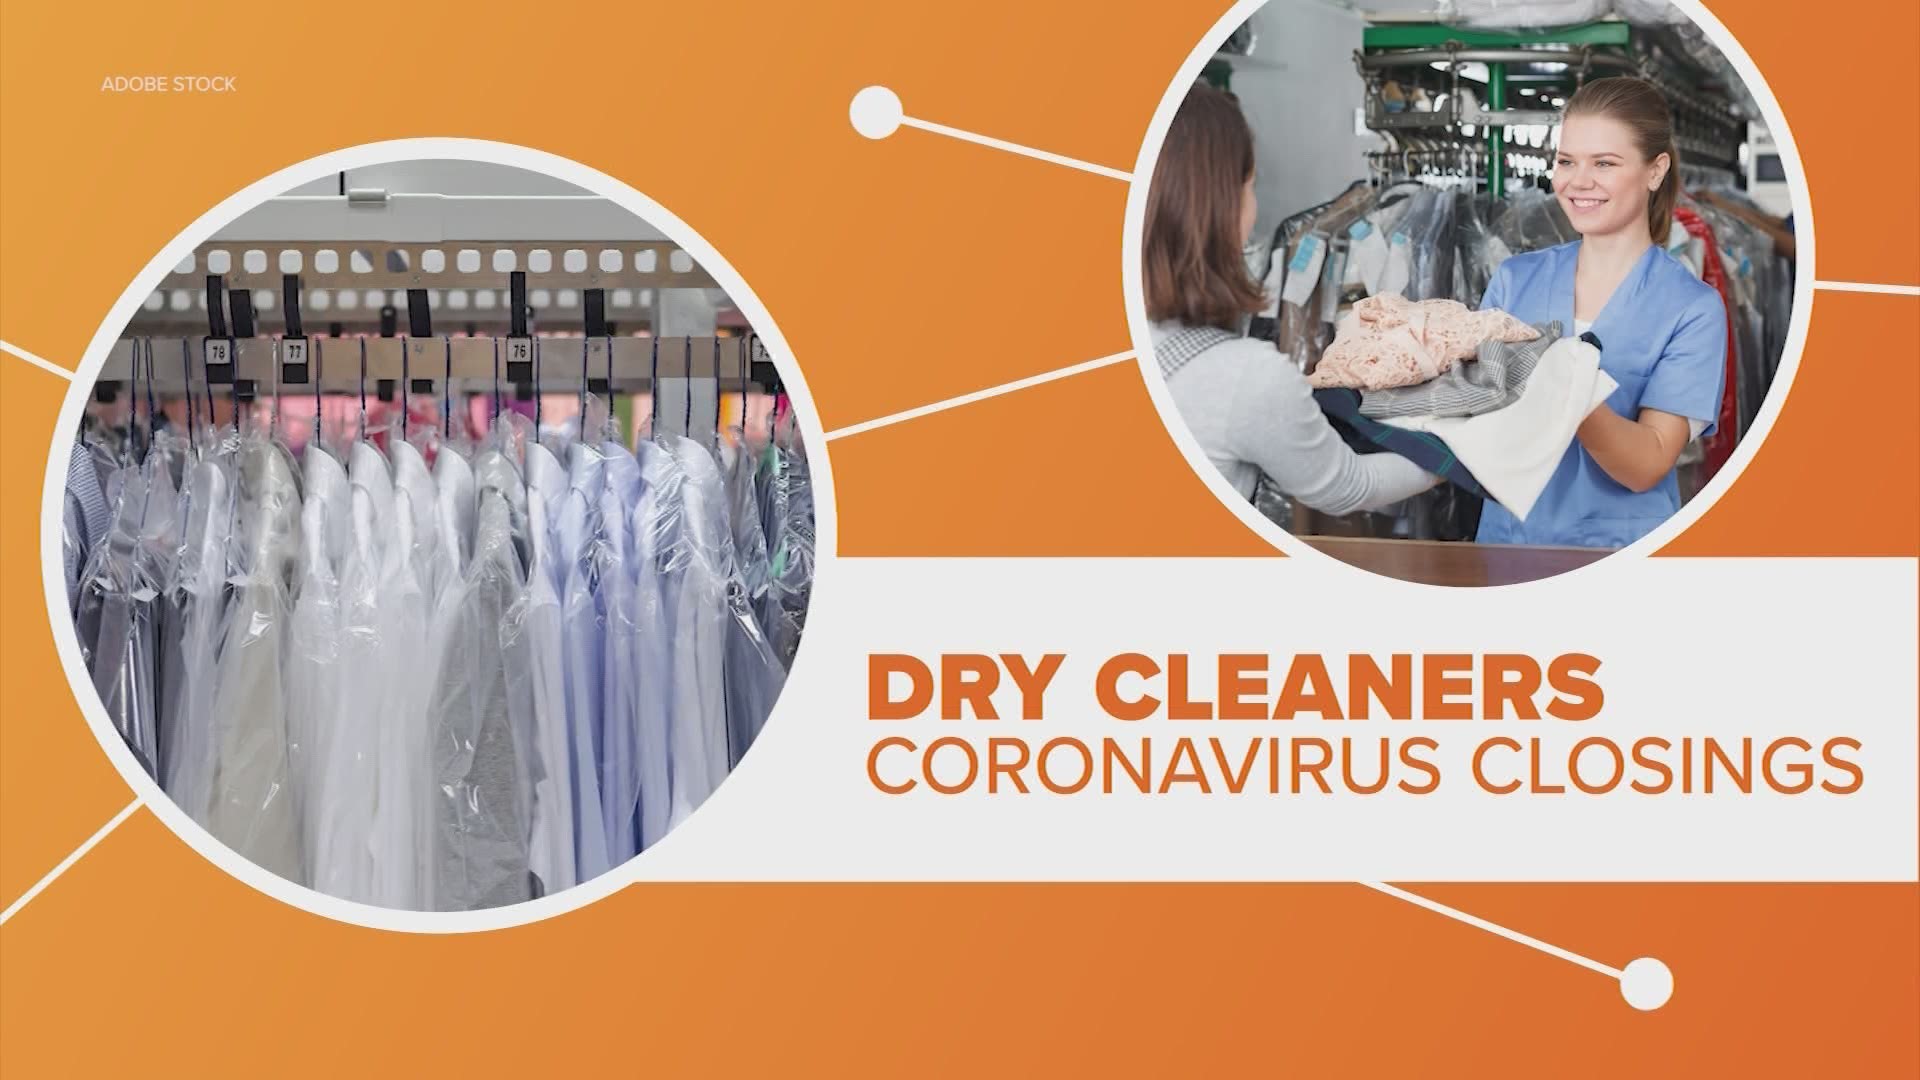 Lots of businesses were hit hard by the pandemic, but experts say COVID-19 may have accelerated the decline of dry cleaners.